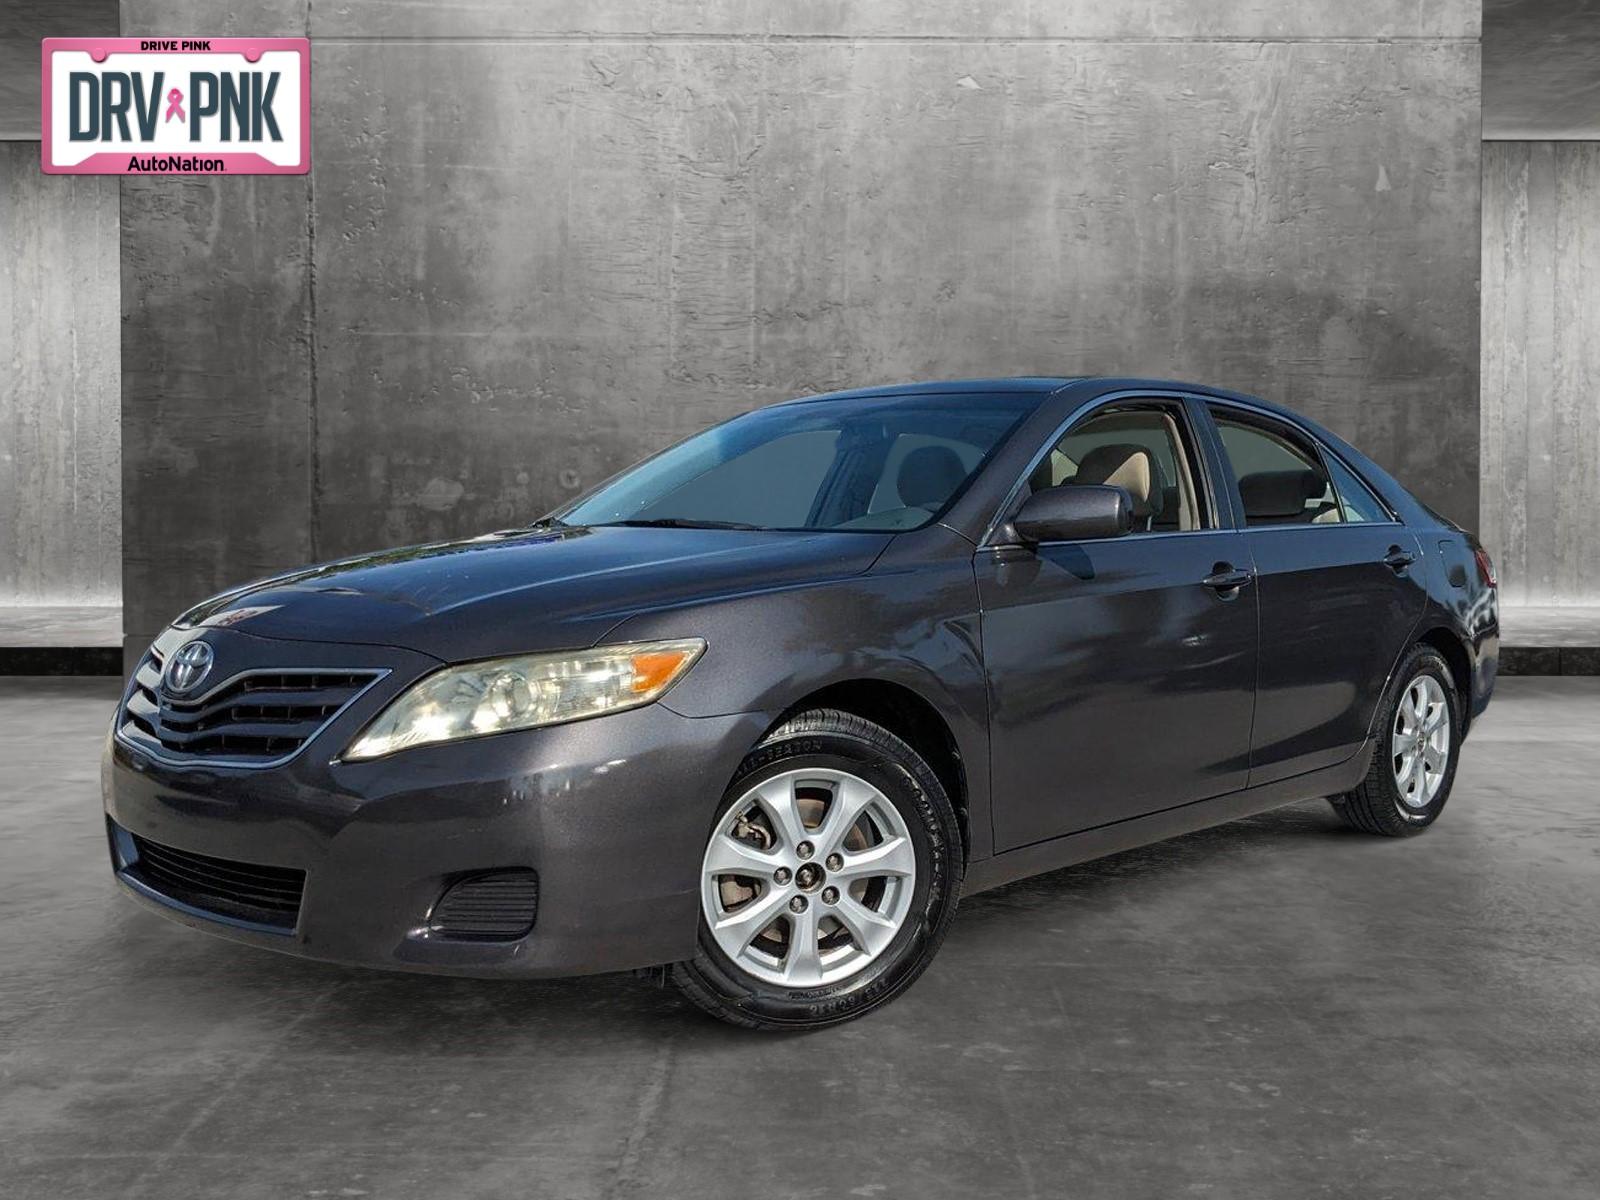 2011 Toyota Camry Vehicle Photo in Winter Park, FL 32792